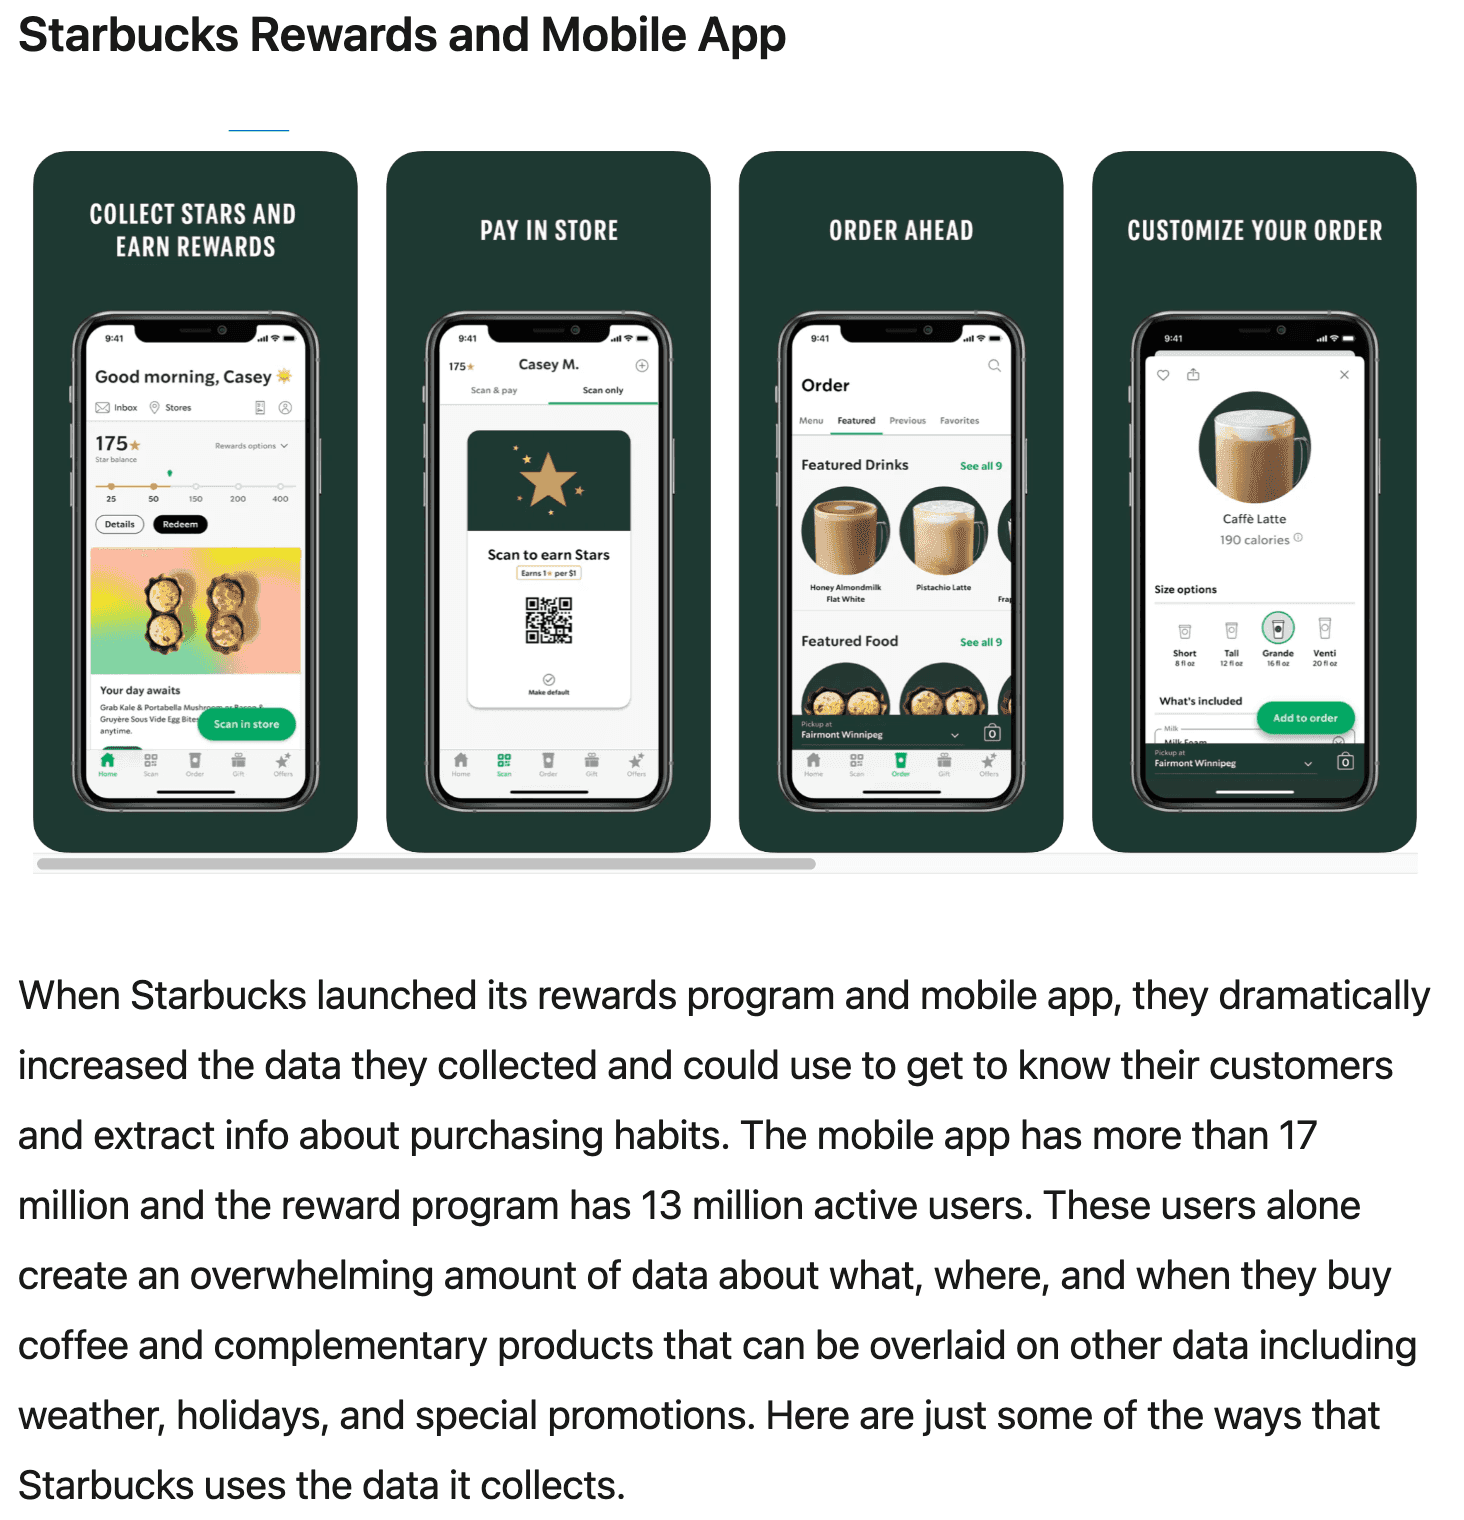 Starbucks rewards and mobile app increases data collected to get to know their customers about their purchasing habits